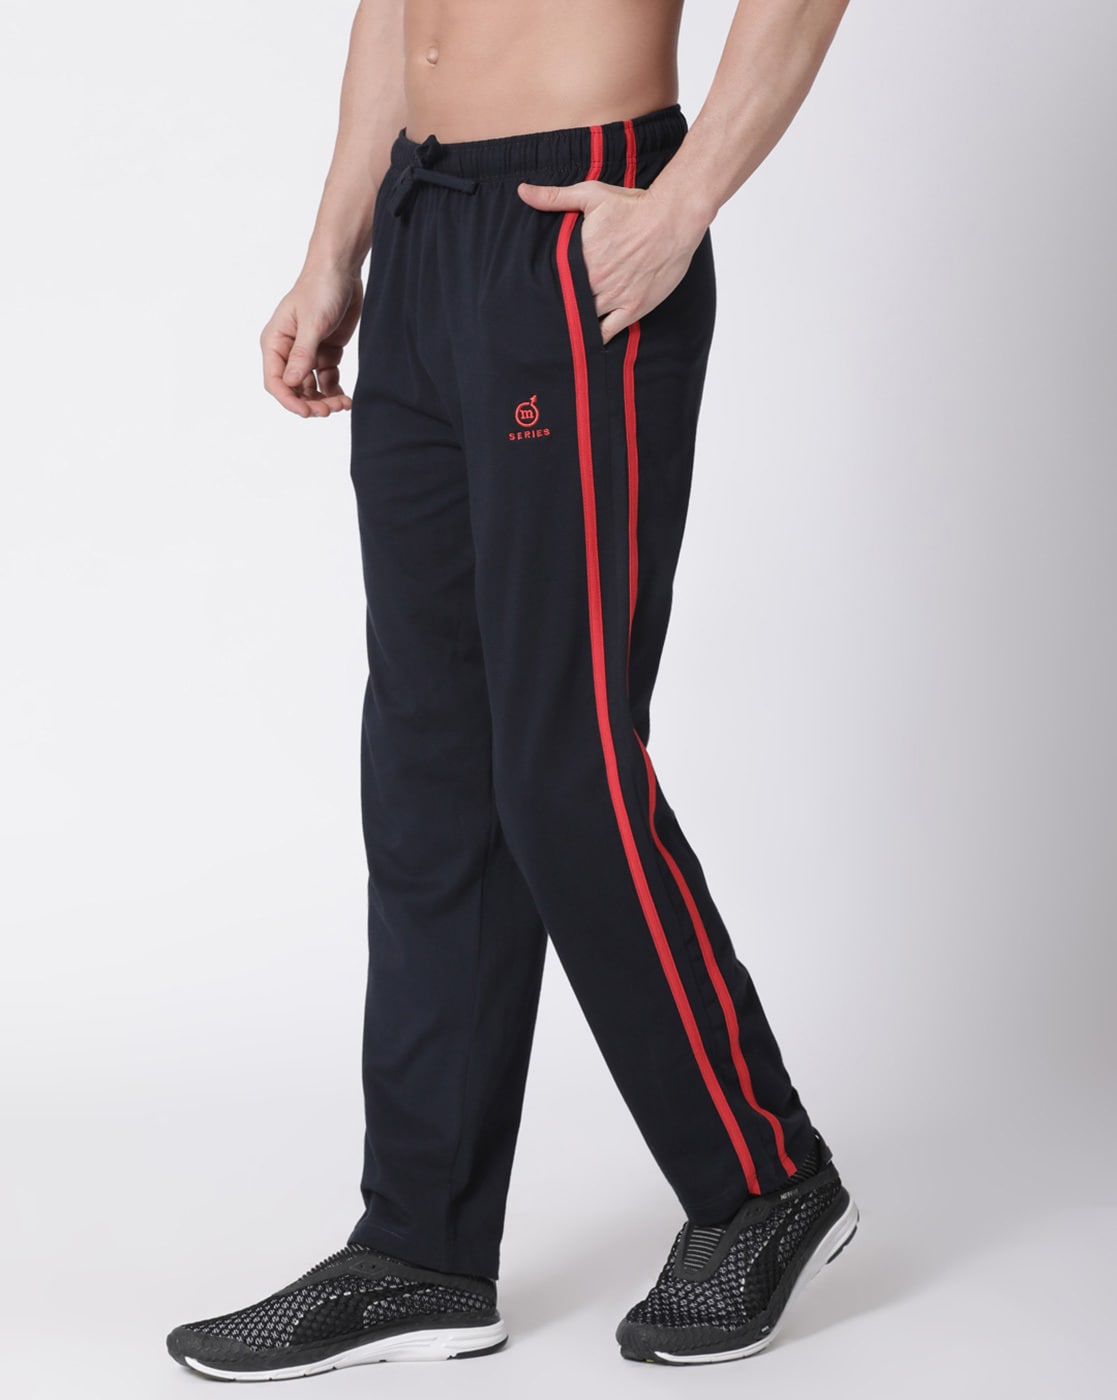 TRIUMPH Men's/Boy's Cricket Pants Online for Player Blue Size X-Small :  Amazon.in: Clothing & Accessories